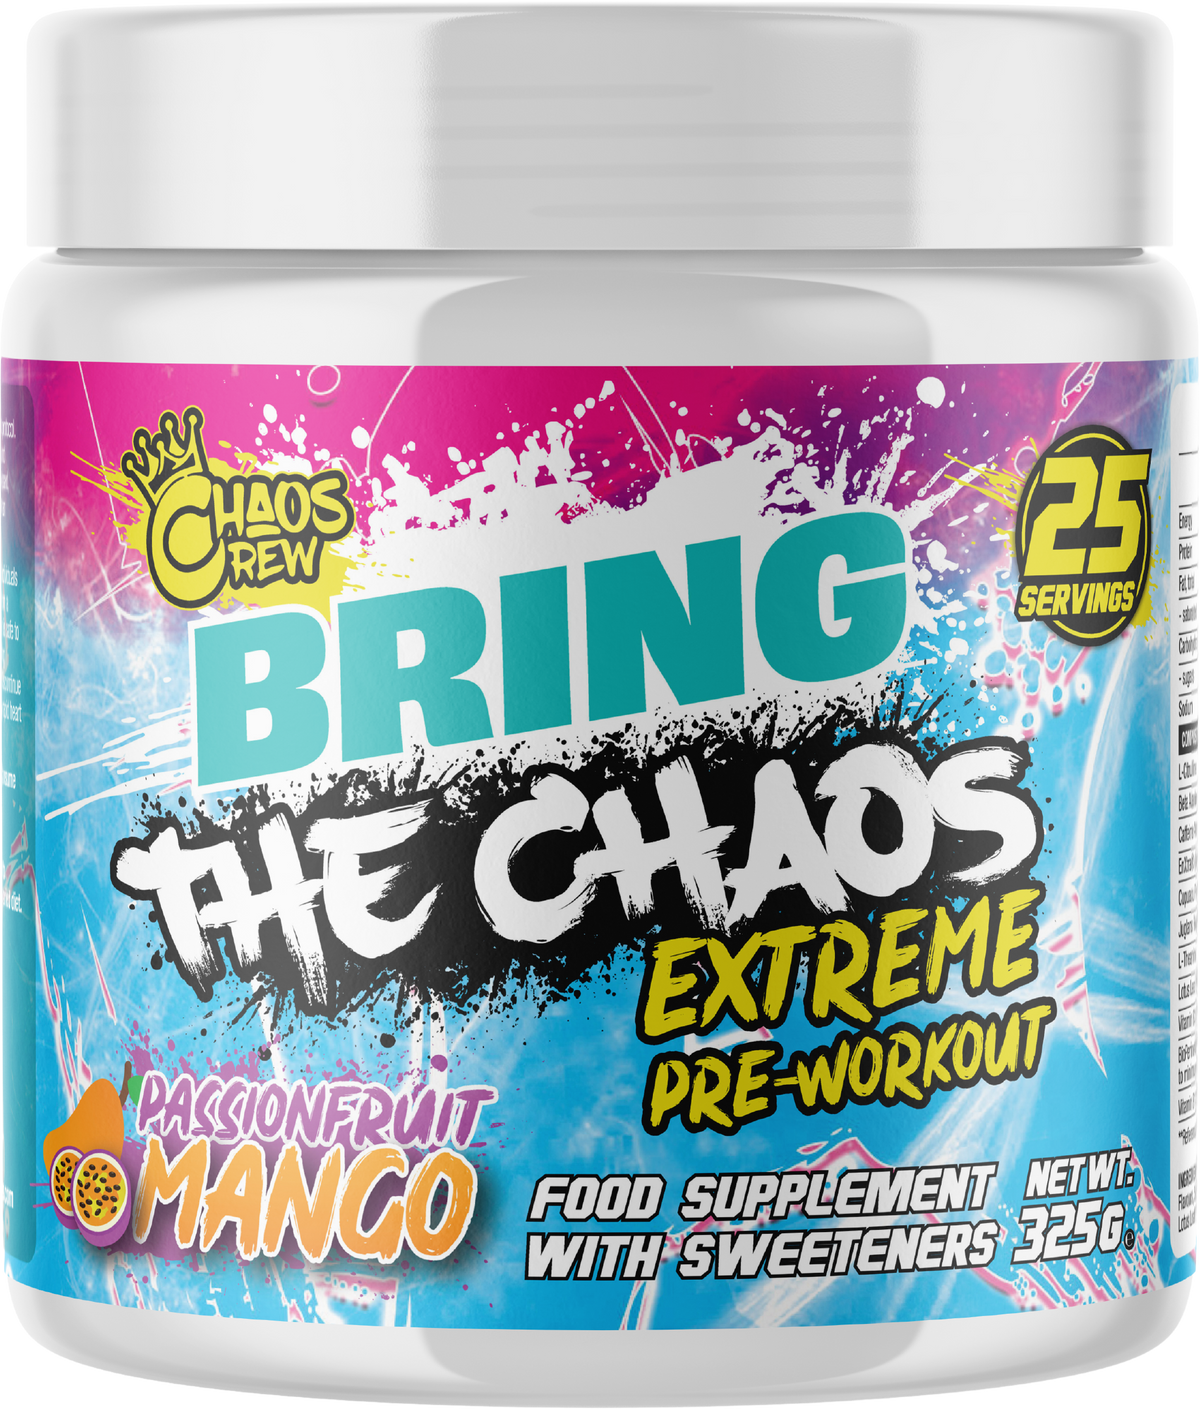 Bring the Chaos V2 | Extreme Pre-Workout - Giant Strawberries